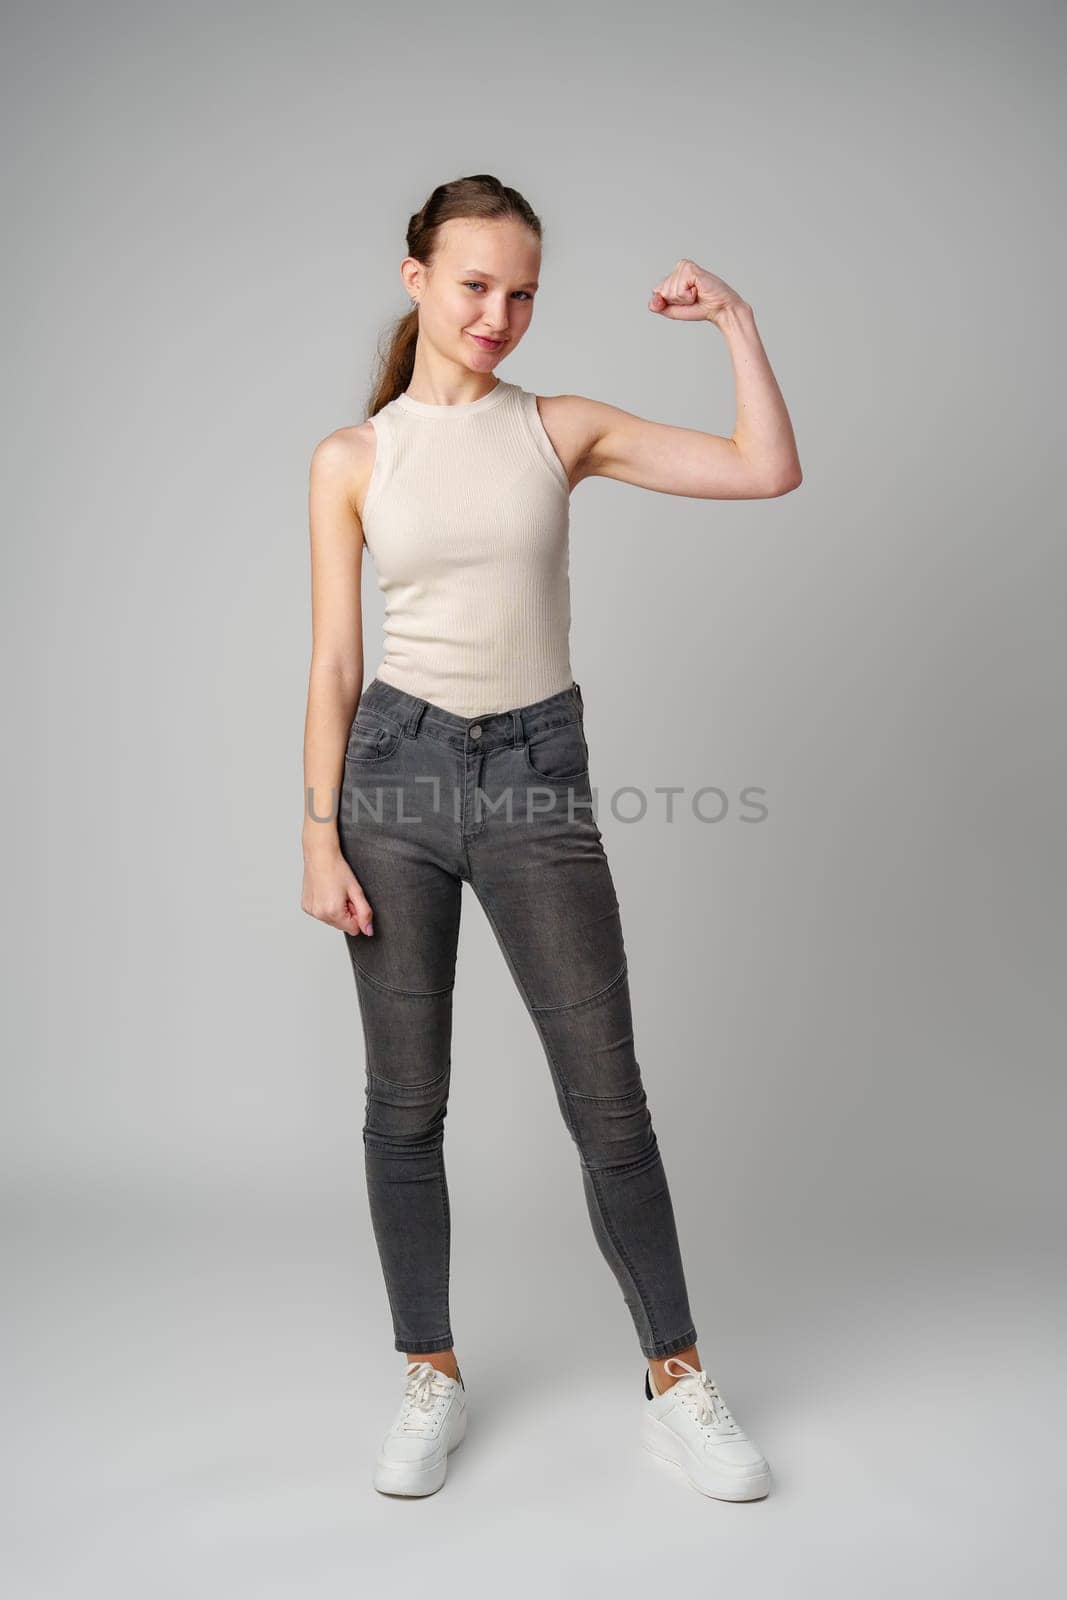 Young Woman Flexing Muscles in Beige Tank Top on gray background in studio